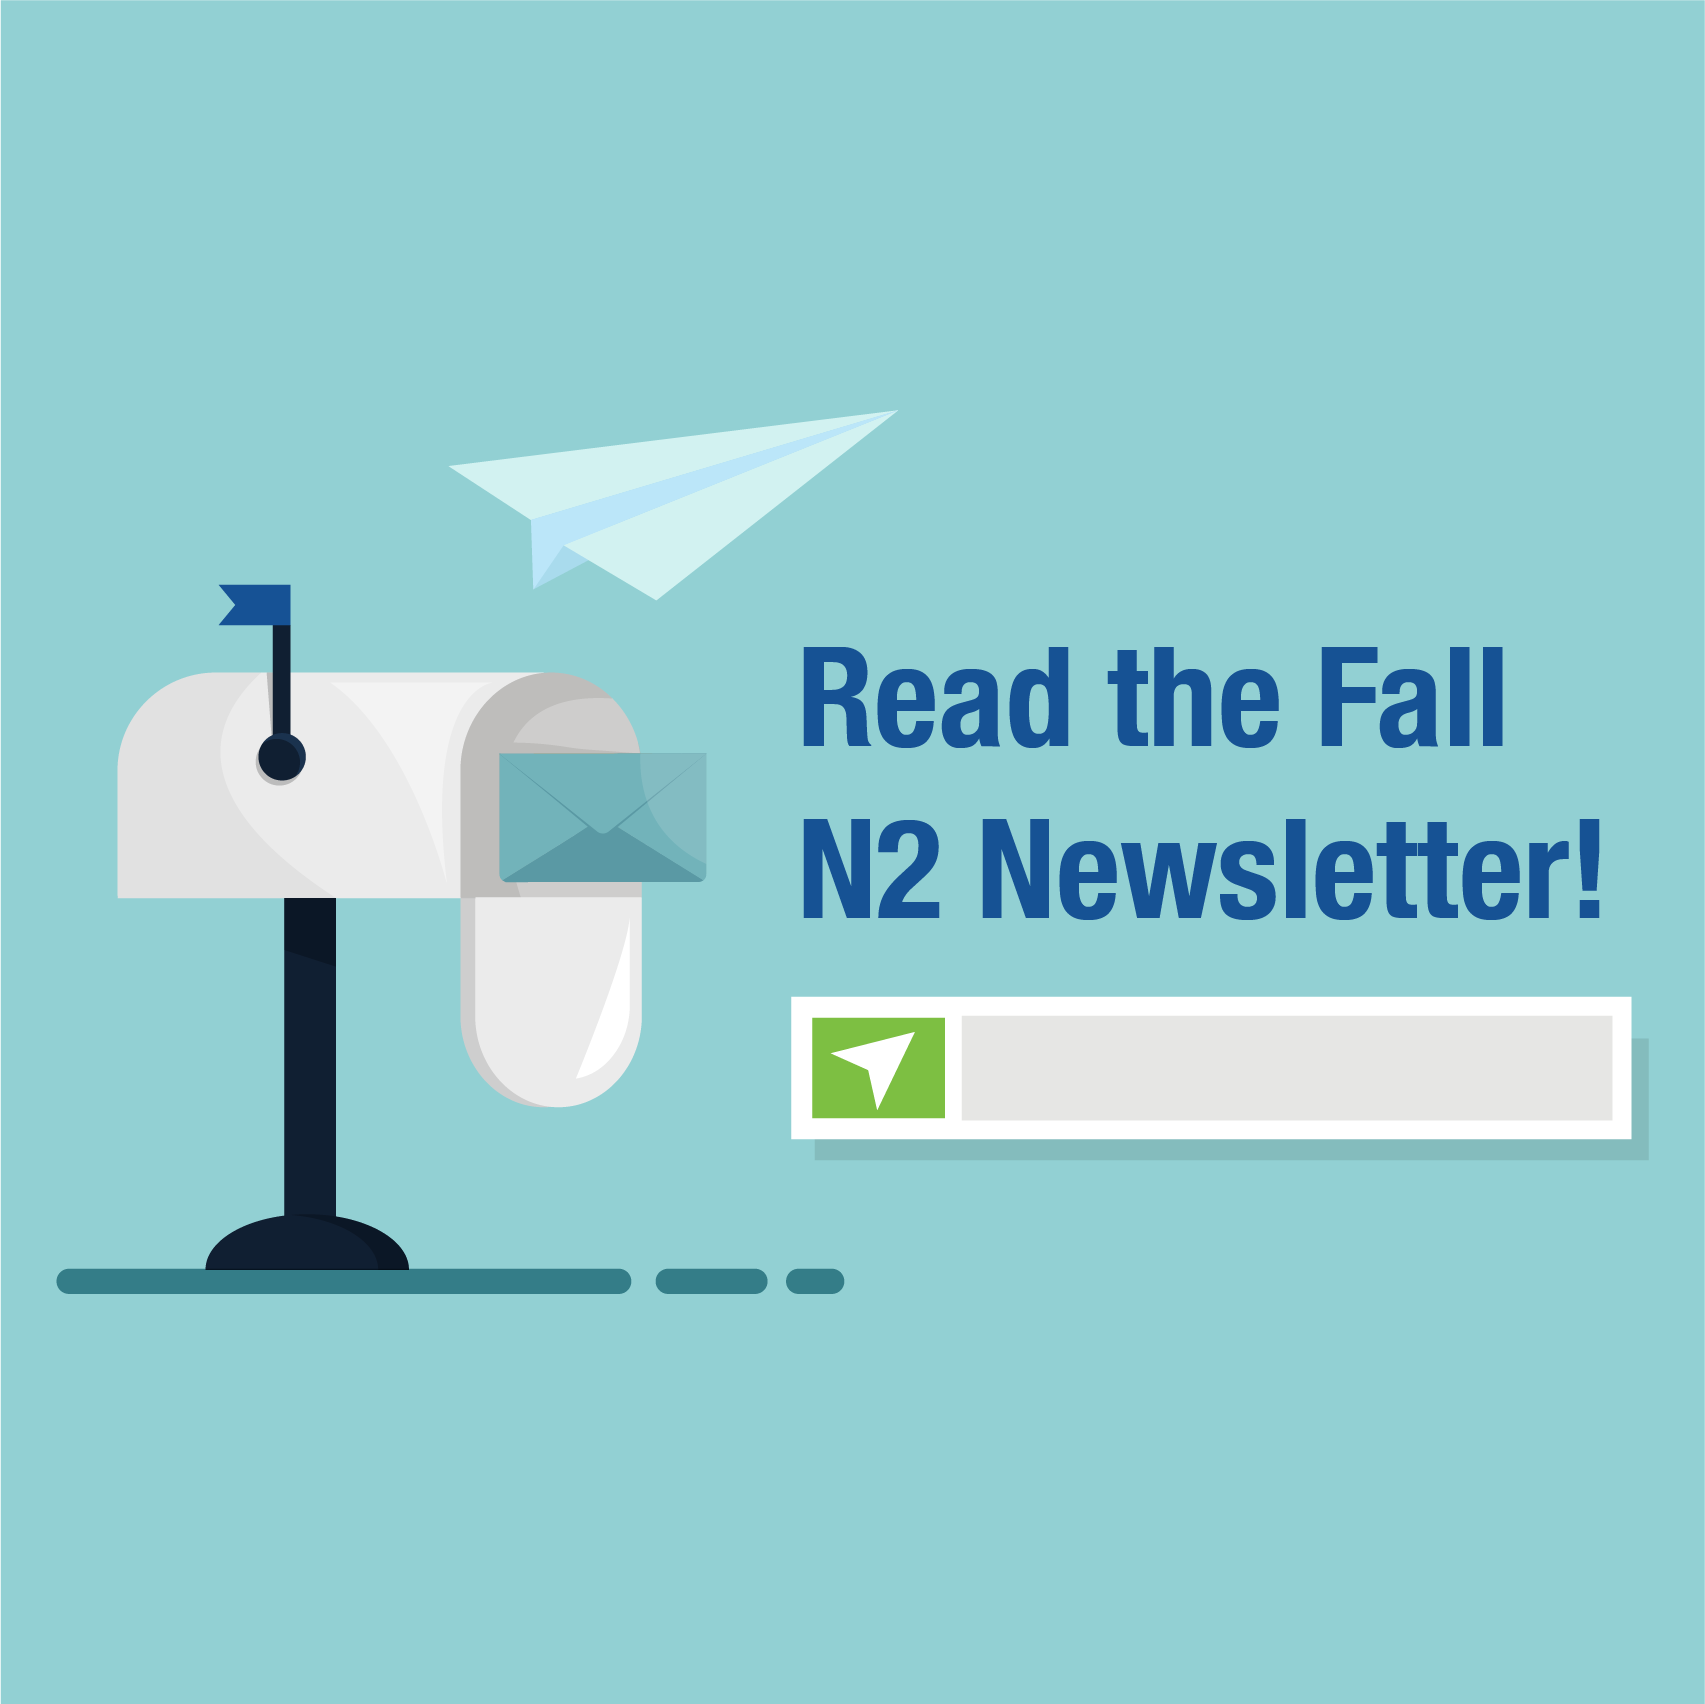 Read the Fall N2 Newsletter